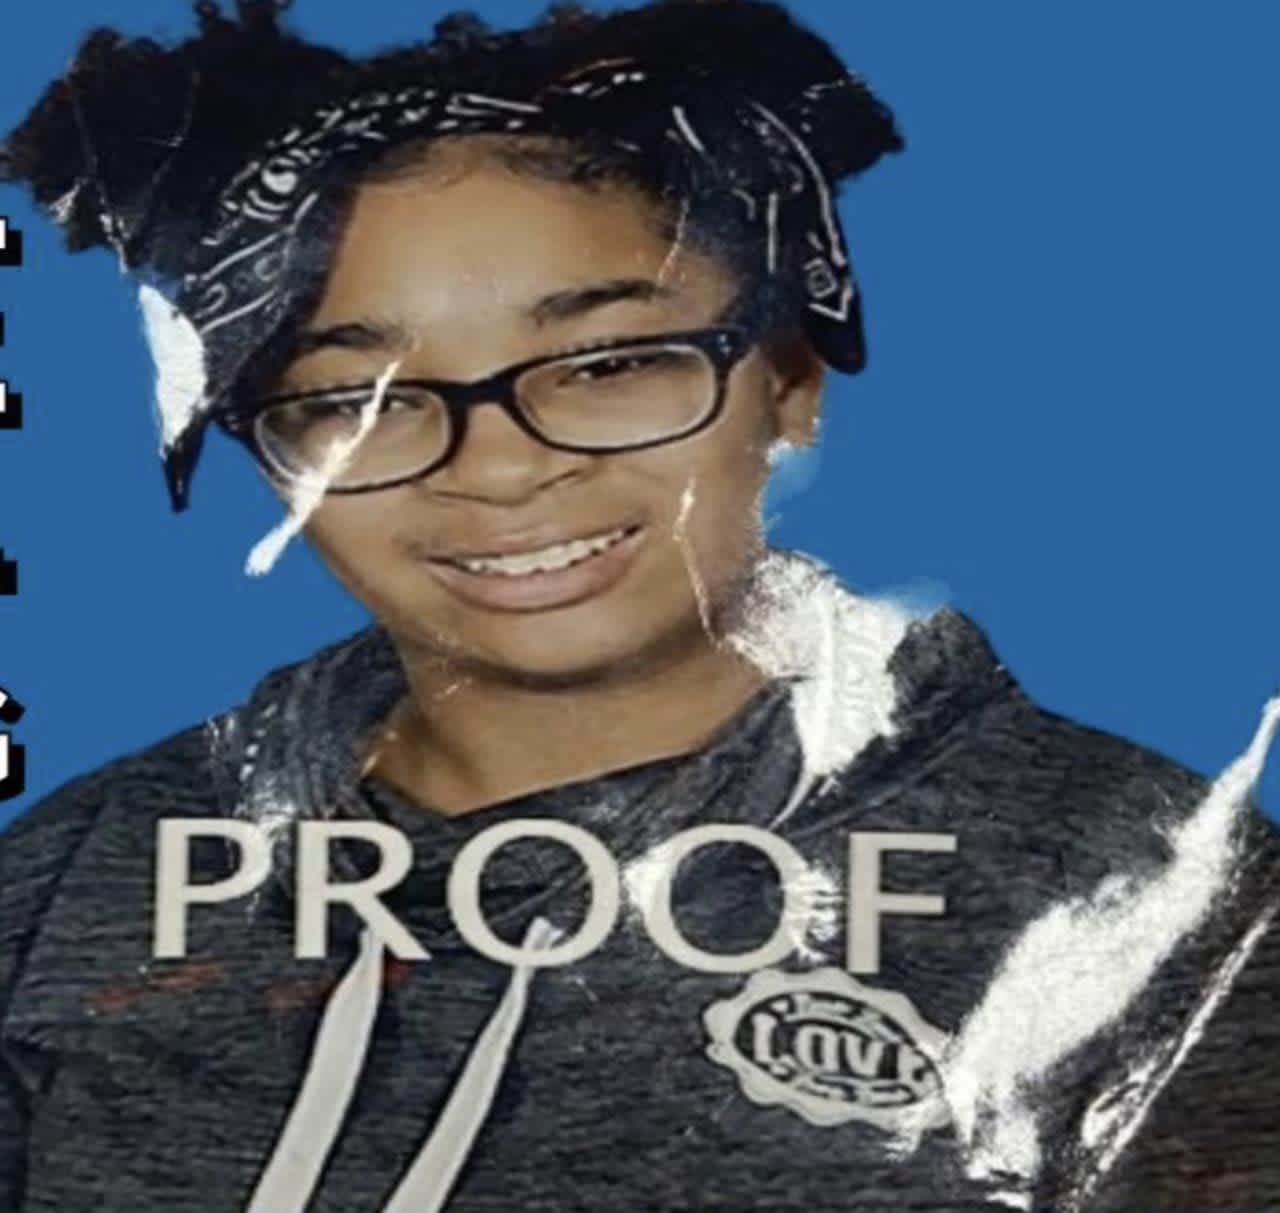 Niome King-Easterling, age 17, has been located by police.